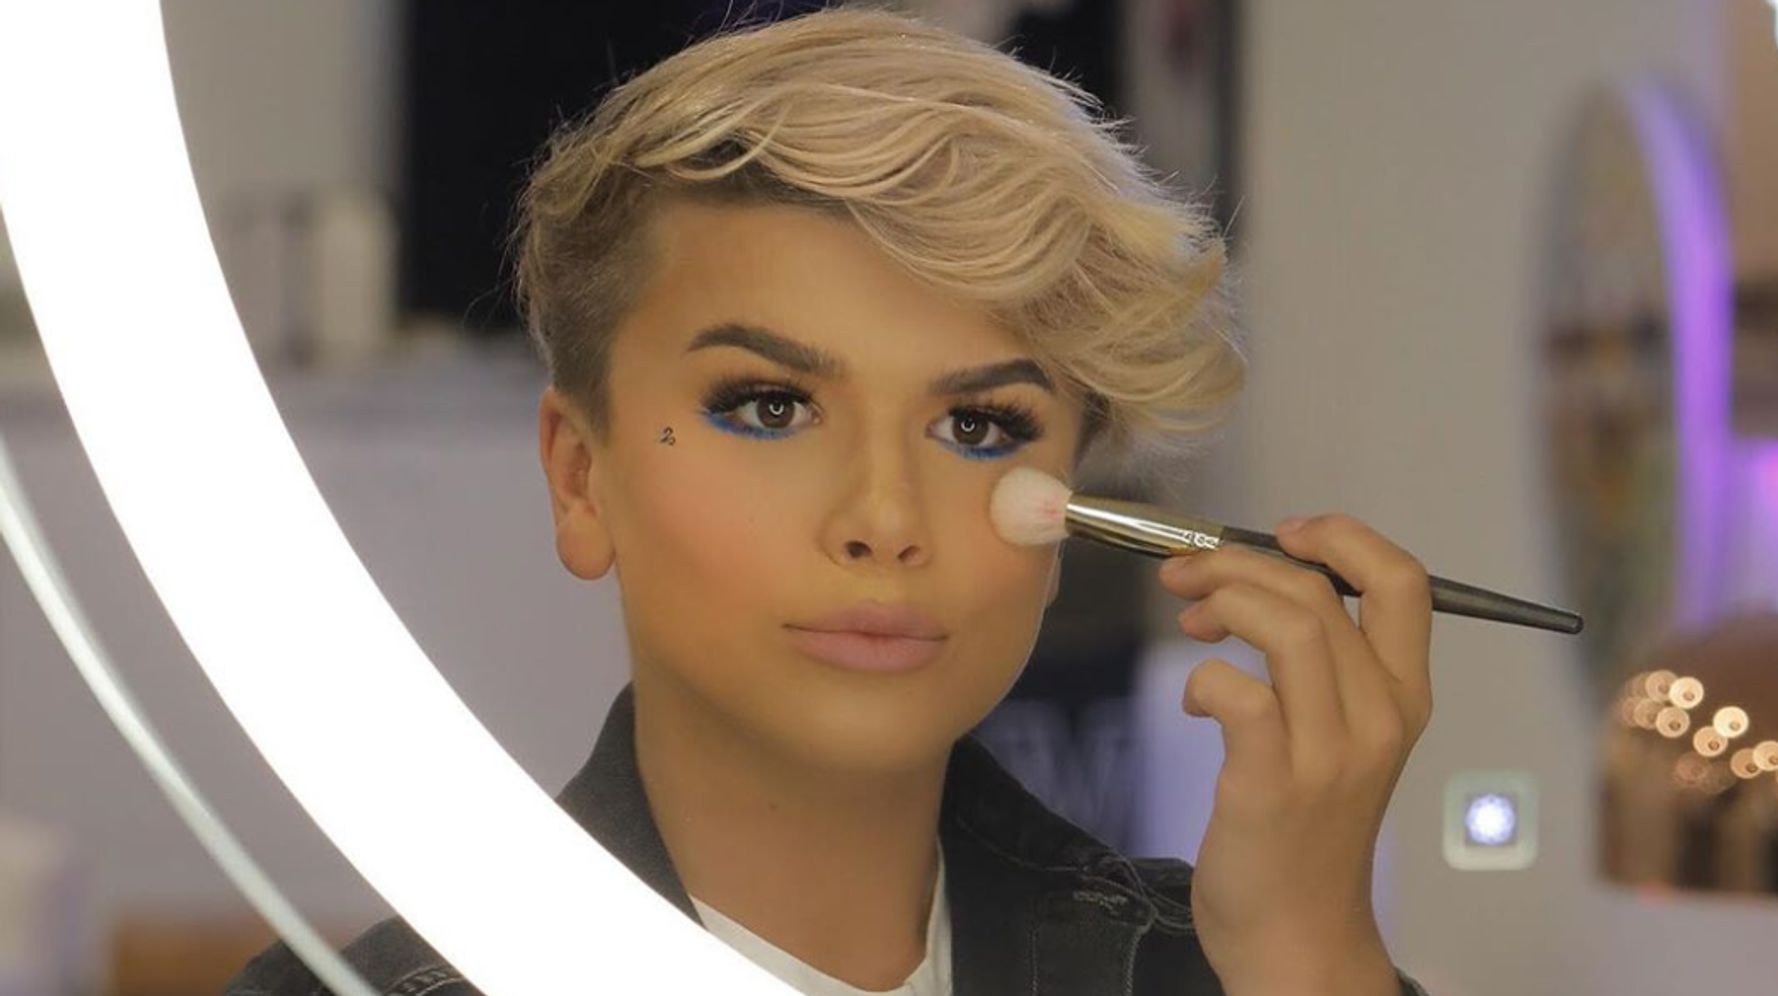 Teen Beauty Vlogger Reuben De Maid On Dealing With Bullying And Hateful Trolls ...1778 x 996